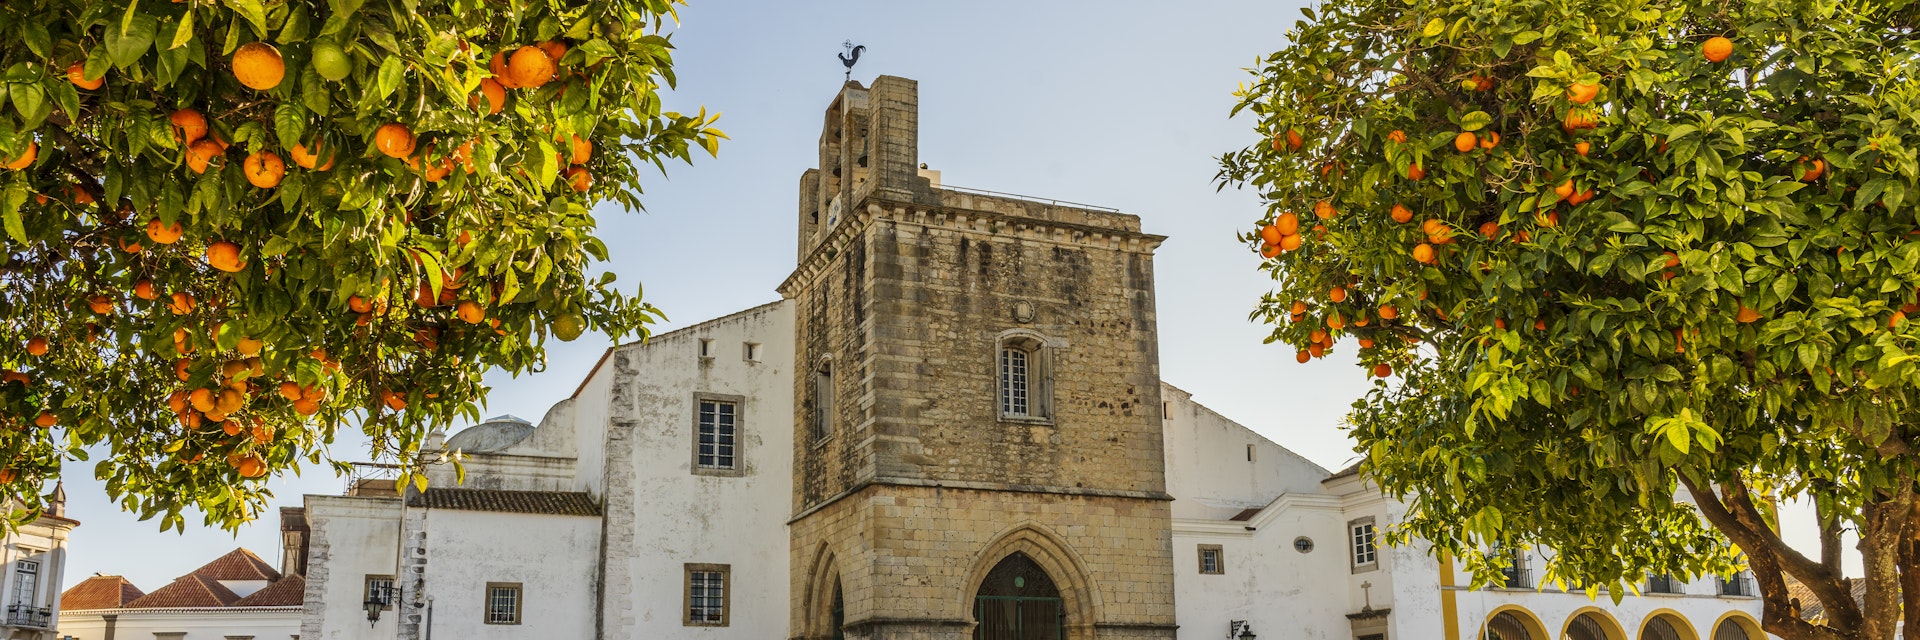 Downtown of Faro with Se Cathedral in the morning with orange tree in the foreground, Algarve, Portugal
1472097846
building, view, orange, portuguese, historical, faro